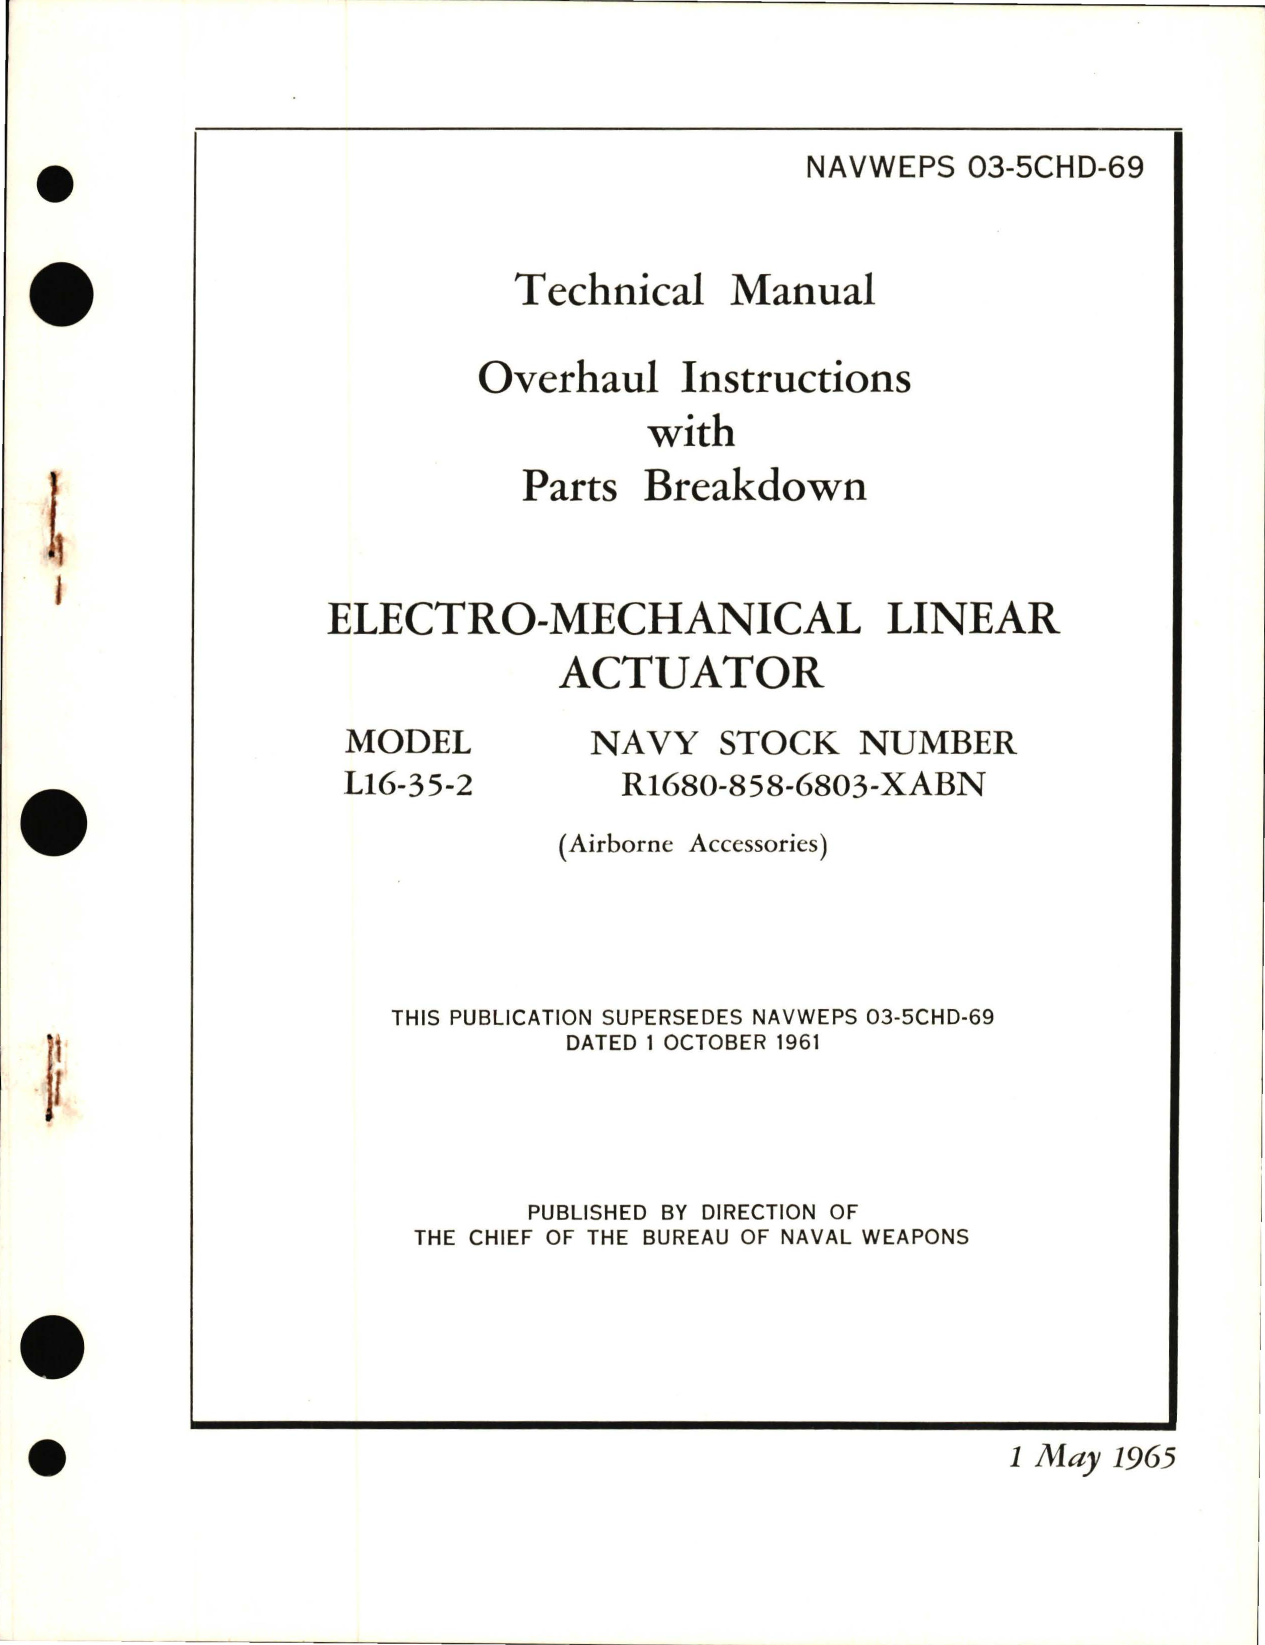 Sample page 1 from AirCorps Library document: Overhaul Instructions with Parts Breakdown for Electro-Mechanical Linear Actuator L-16-35-2